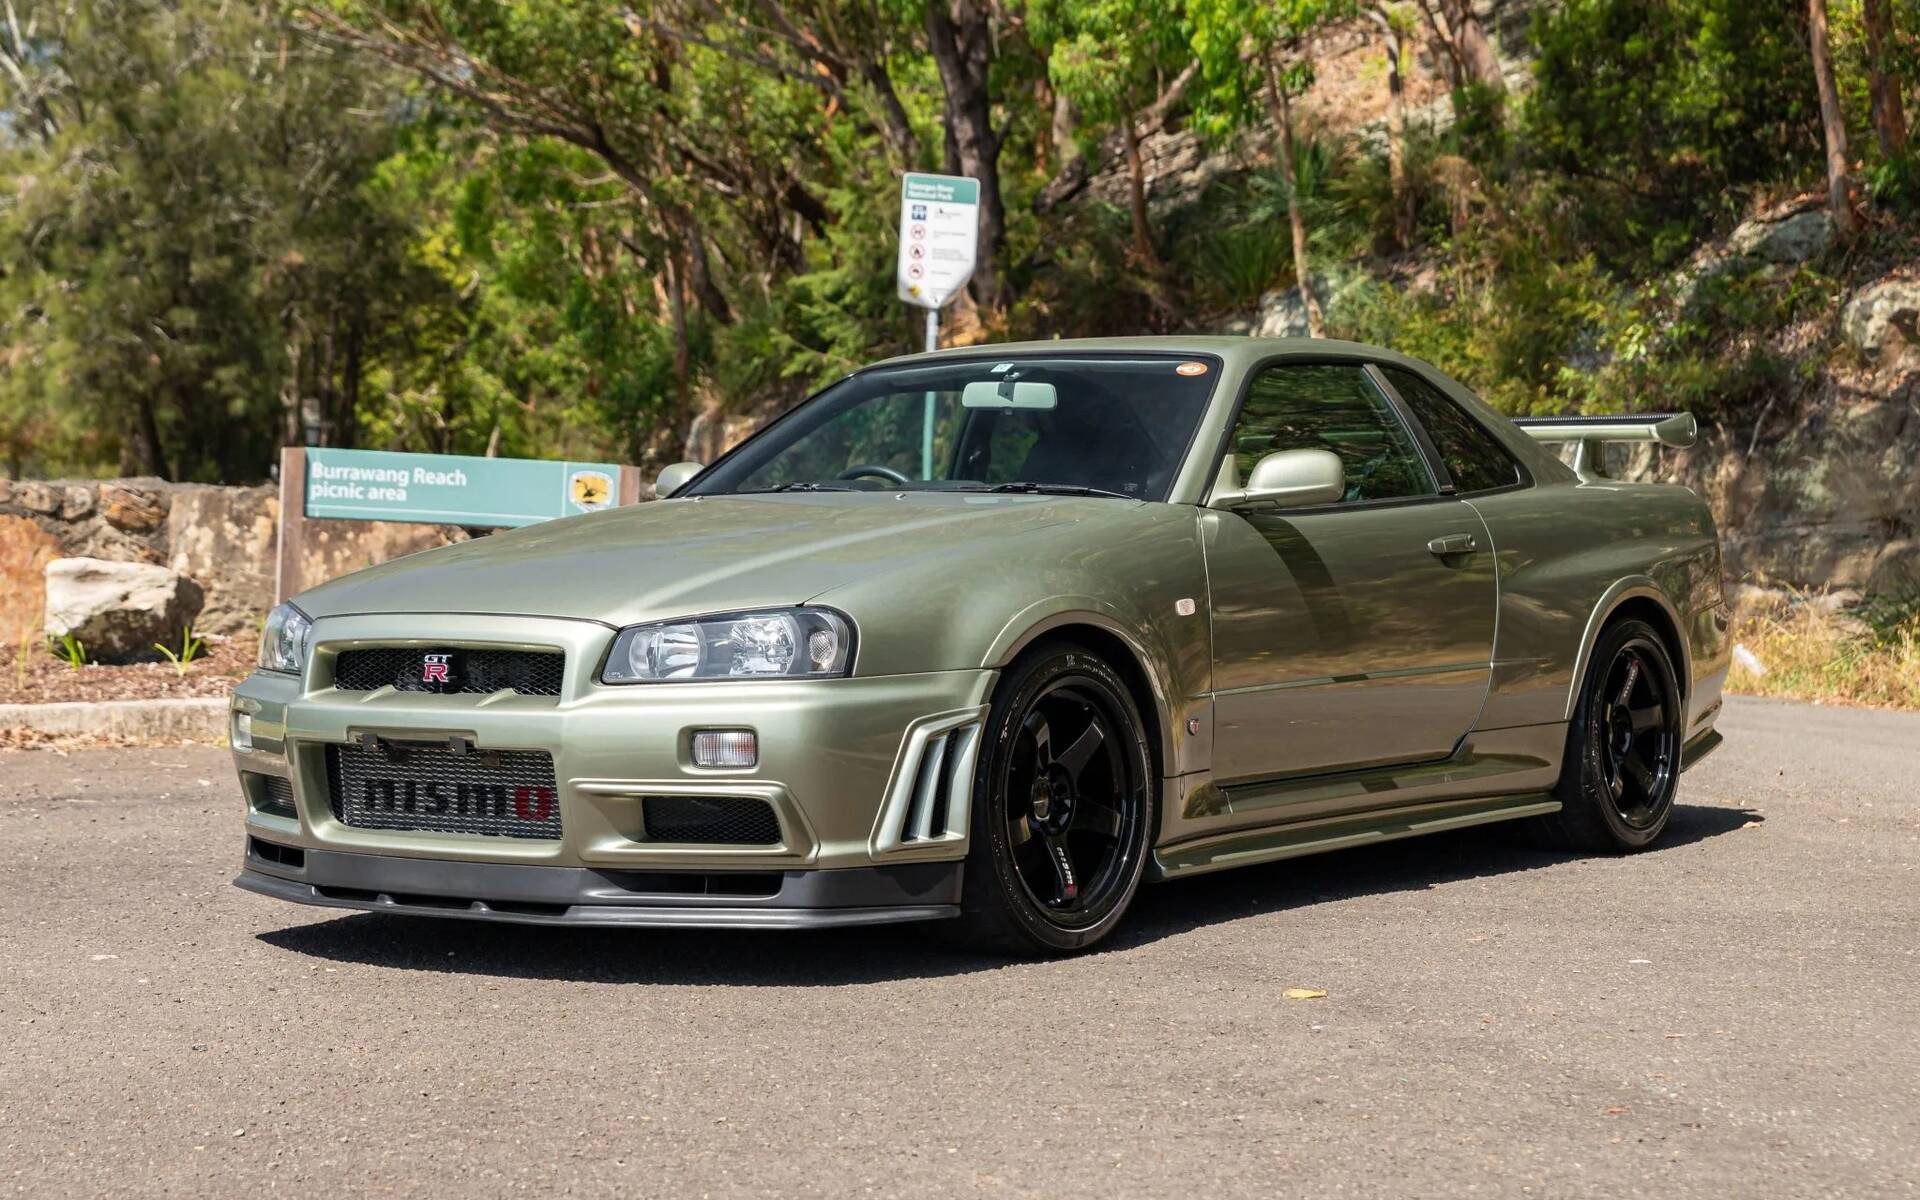 2002 Nissan Skyline GT-R M-Spec Nür Sold for a Whopping $608,000